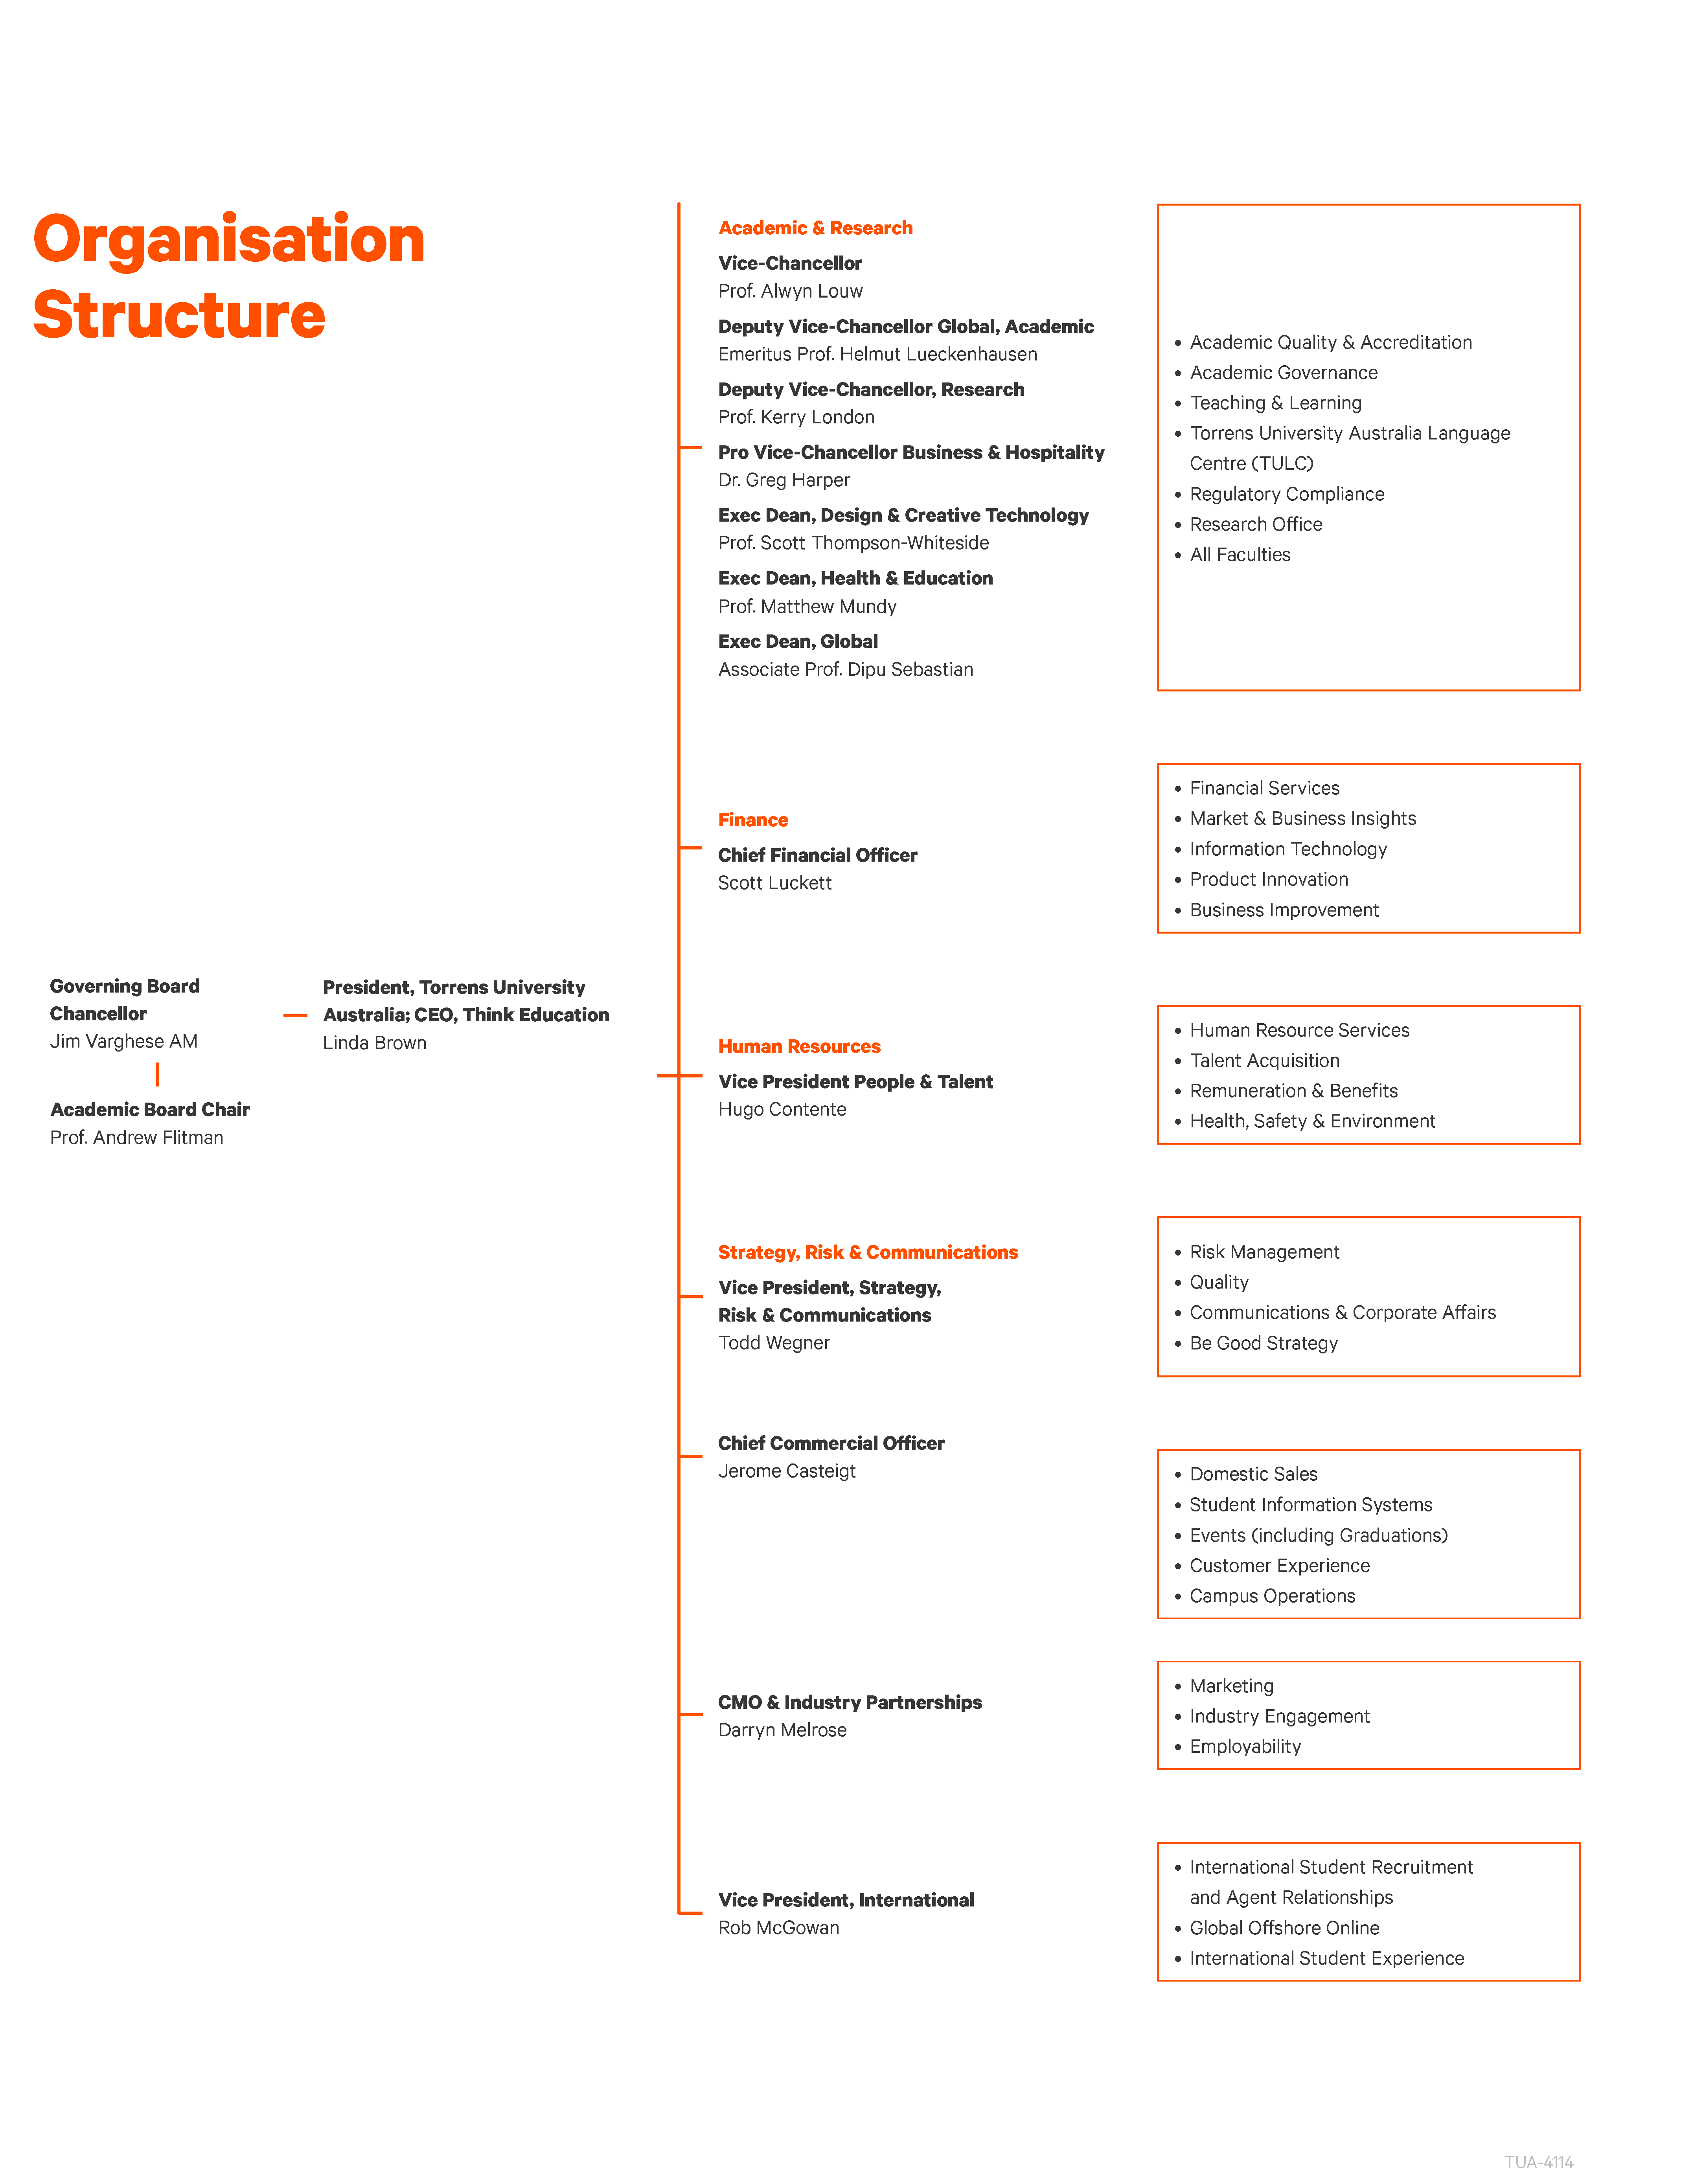 Governance and Leadership | Organisational Structure Chart | Torrens University